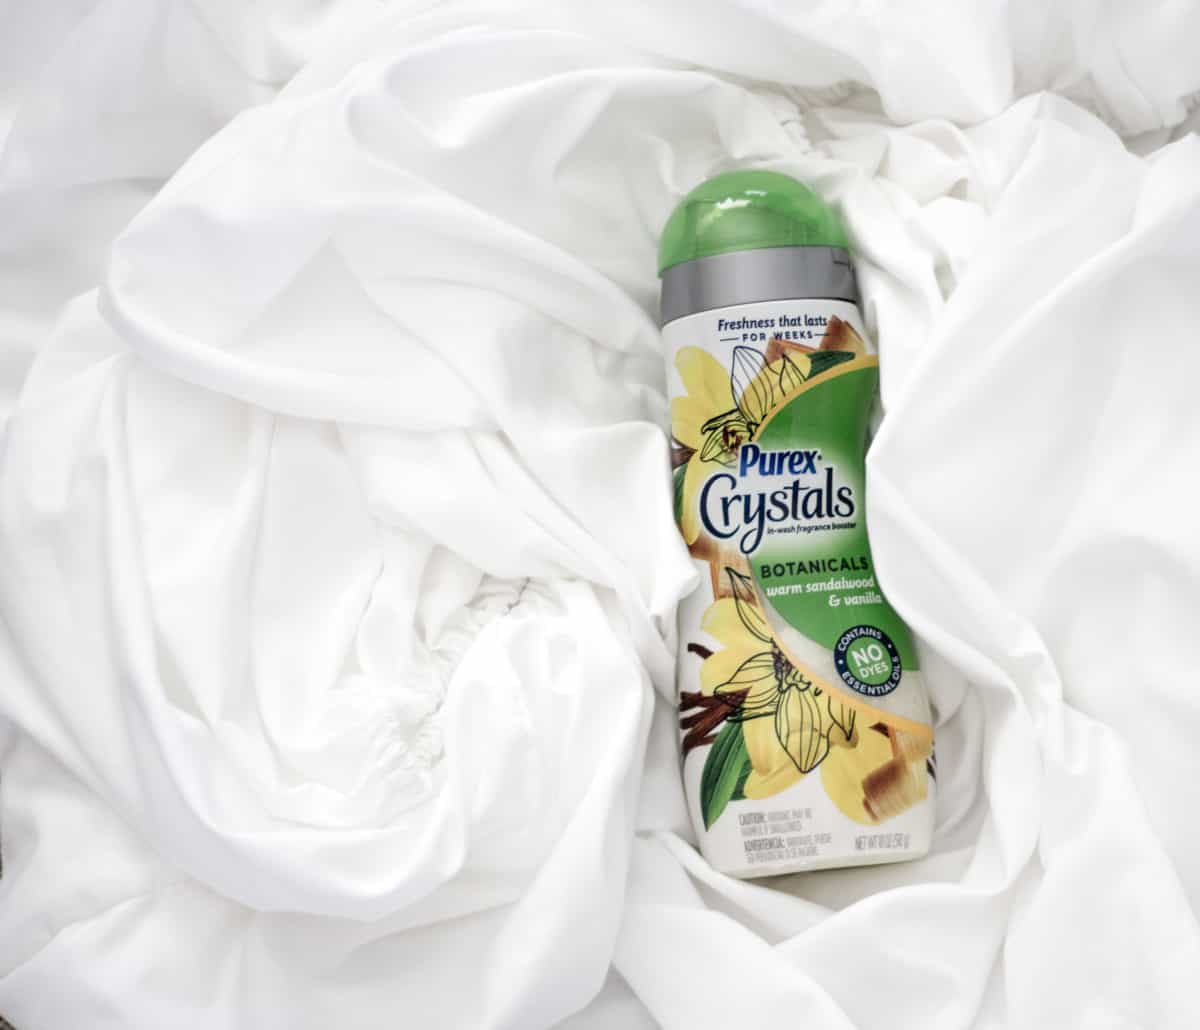 Washing a king sized comforter in a tiny laundry room can be hard, but I've got a super simple solution for you! #shop #PurexCrystalFresh